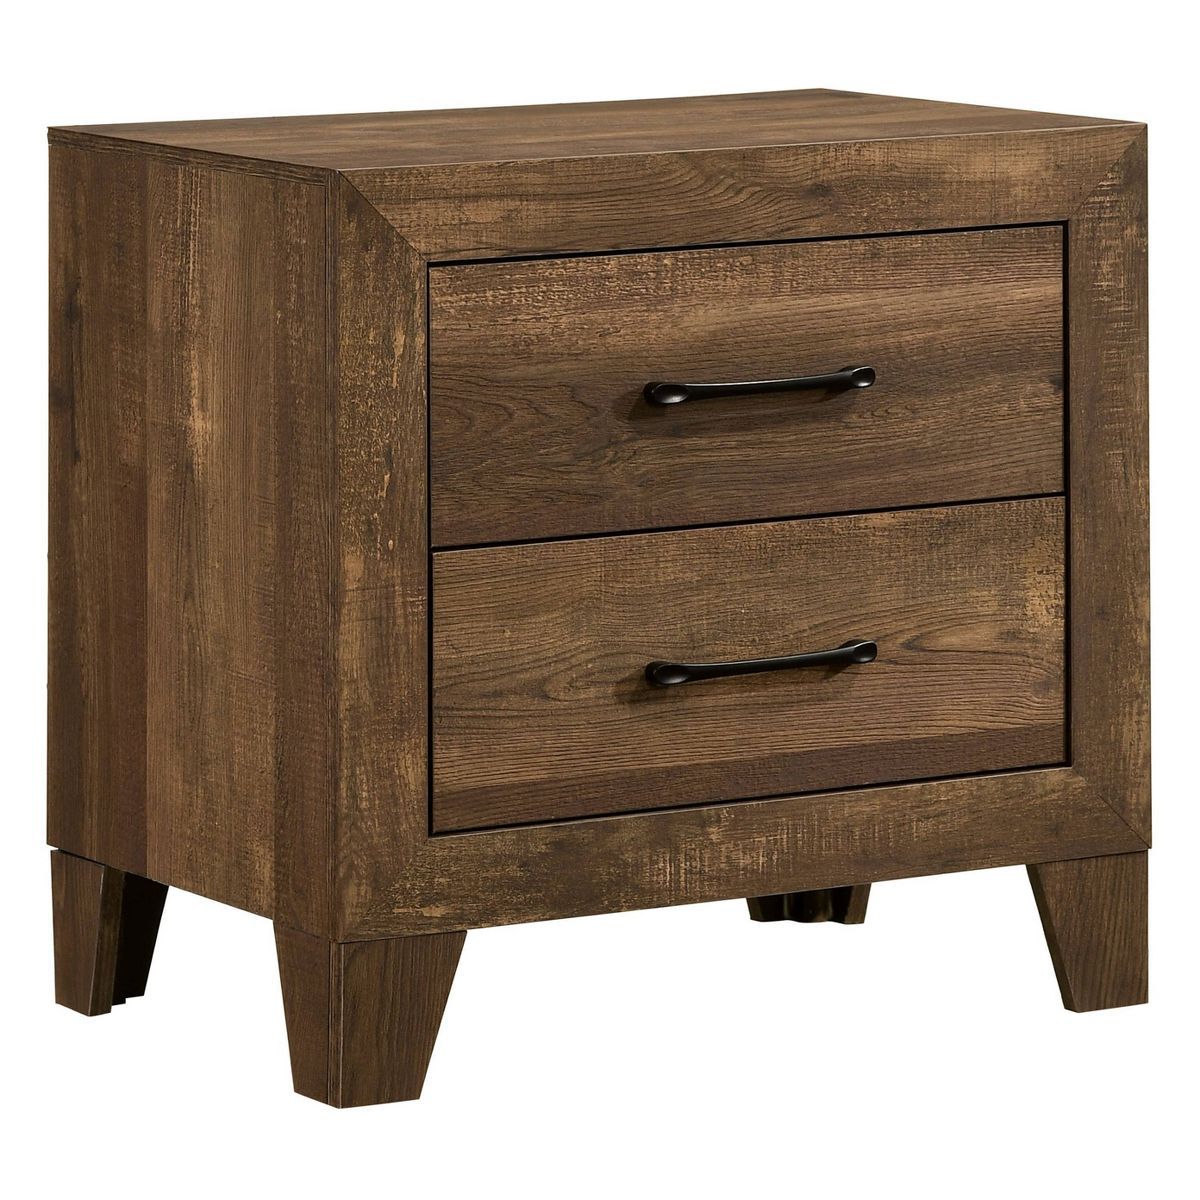 Quail 2 Drawer Nightstand Rustic Light Walnut - HOMES: Inside + Out | Target